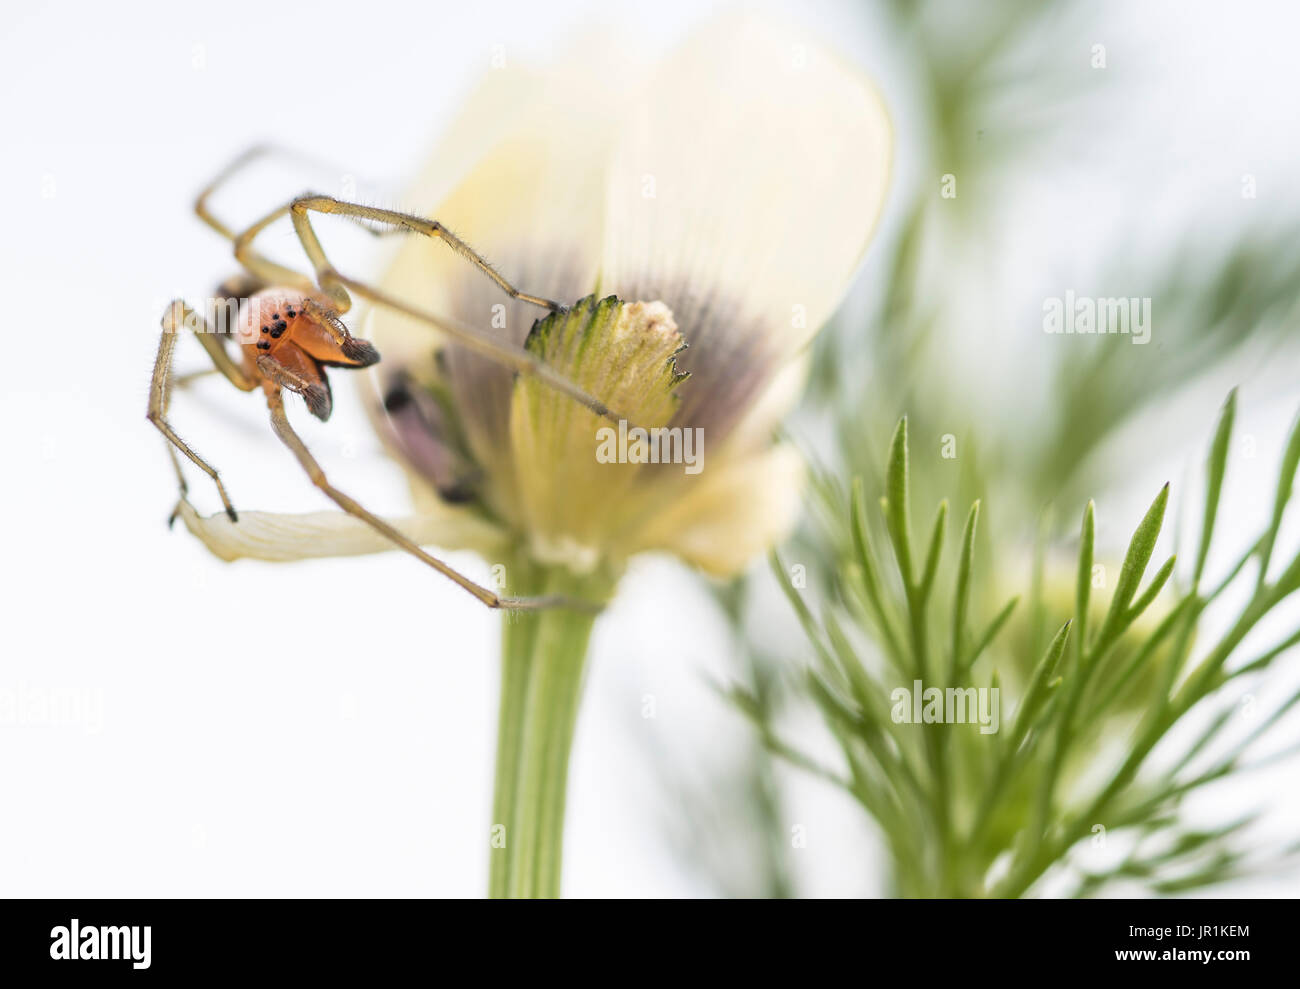 Spider moving through a plant in search of food Stock Photo